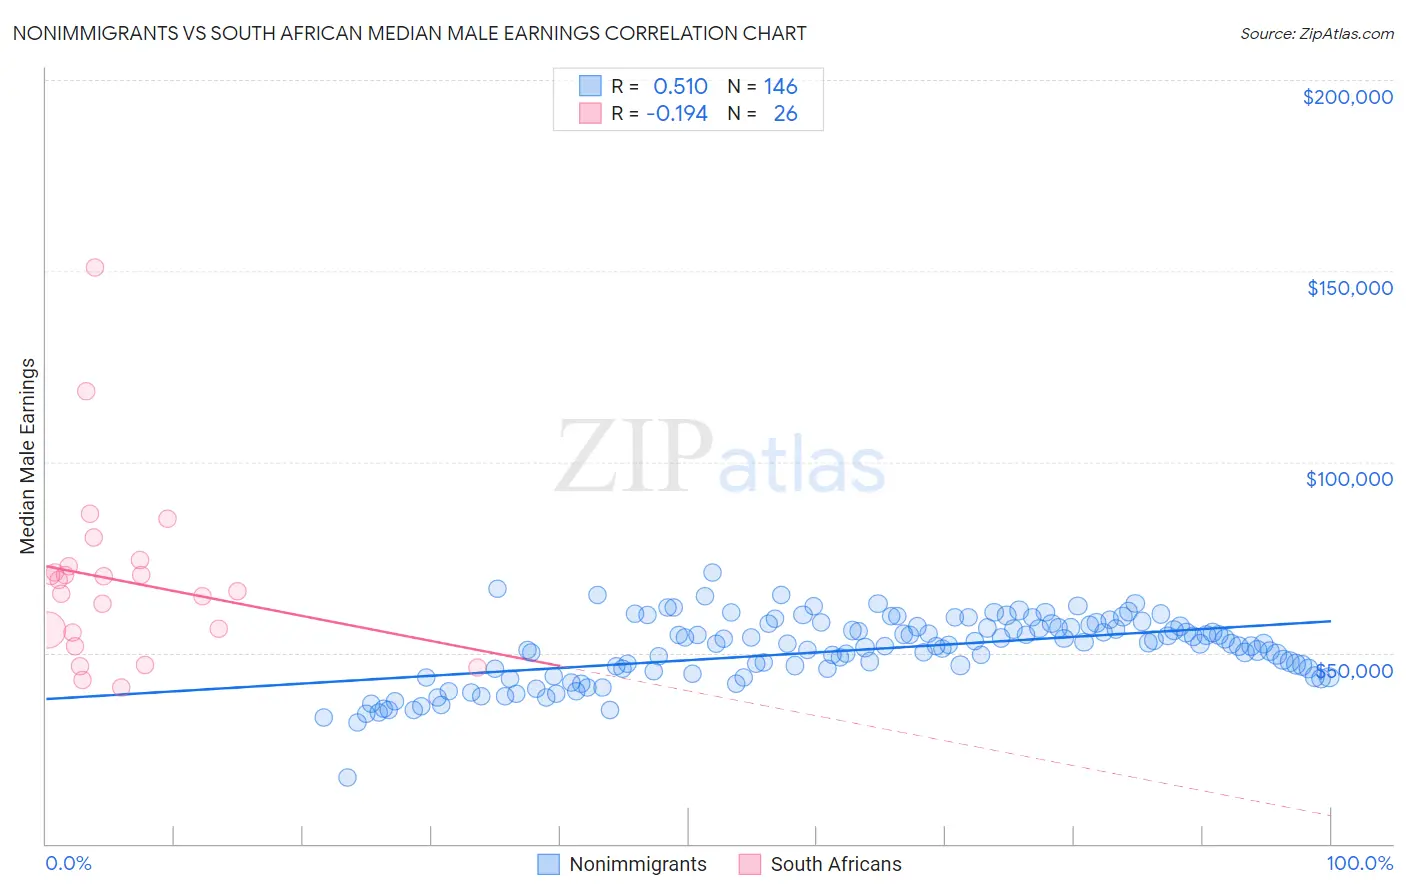 Nonimmigrants vs South African Median Male Earnings